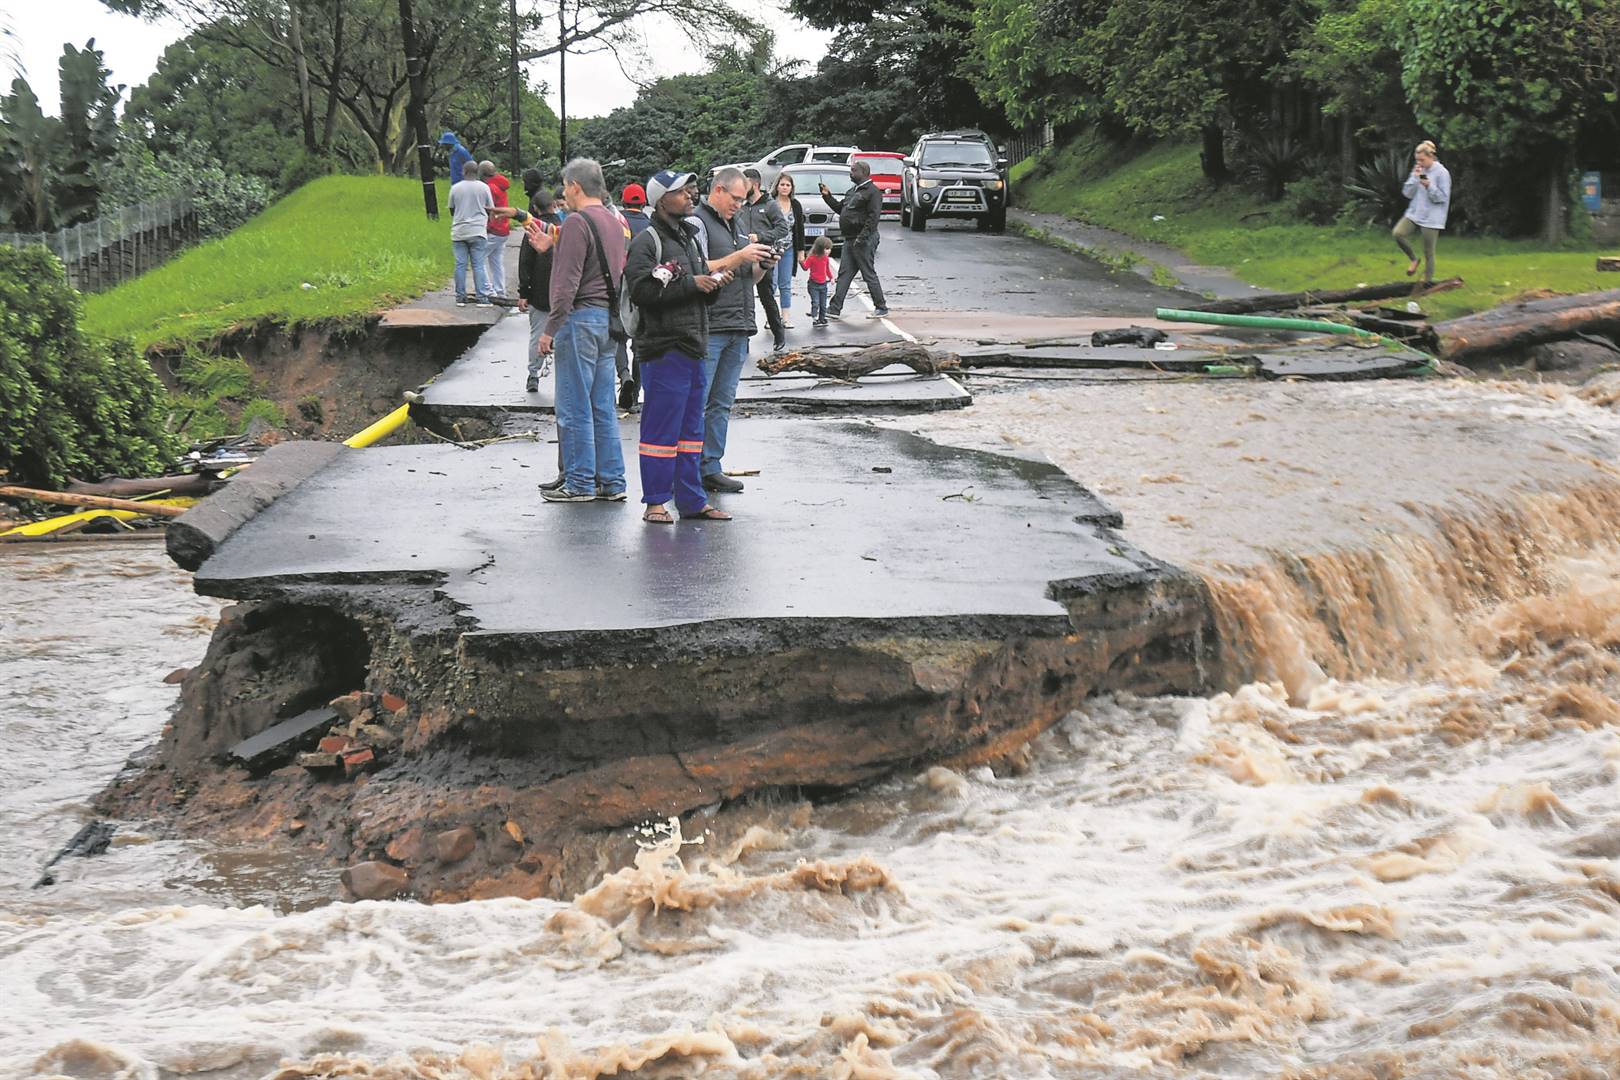 Part of Caversham Road in Pinetown washed away this week. (Photo by Gallo Images/Darren Stewart)